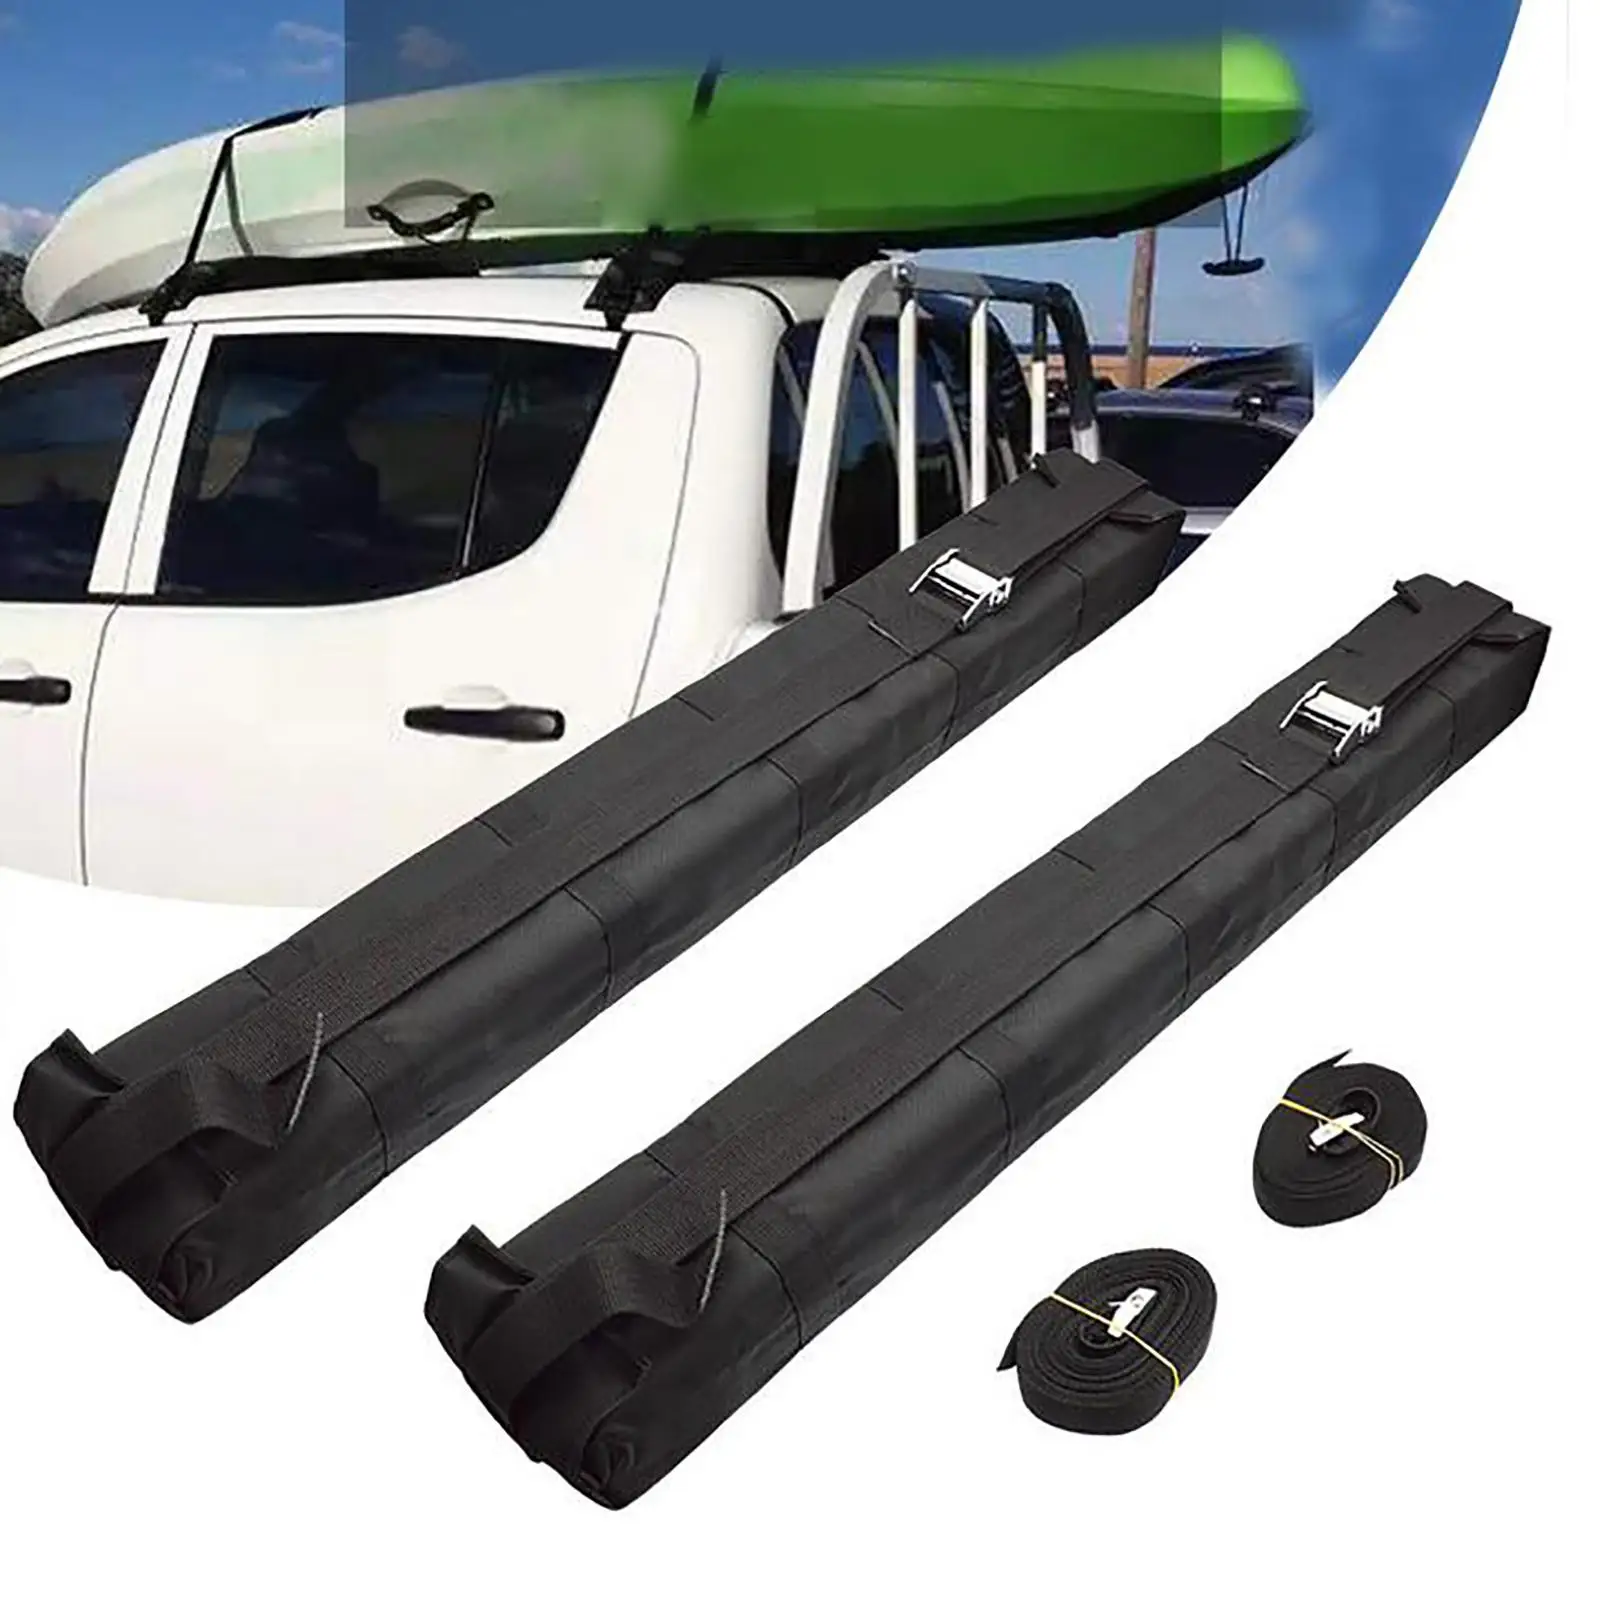 Kayak Roof Rack Pads Universal Car Soft Roof Rack with Tie Down Straps for Canoe Surfboard Paddleboard Snowboard Water Sports